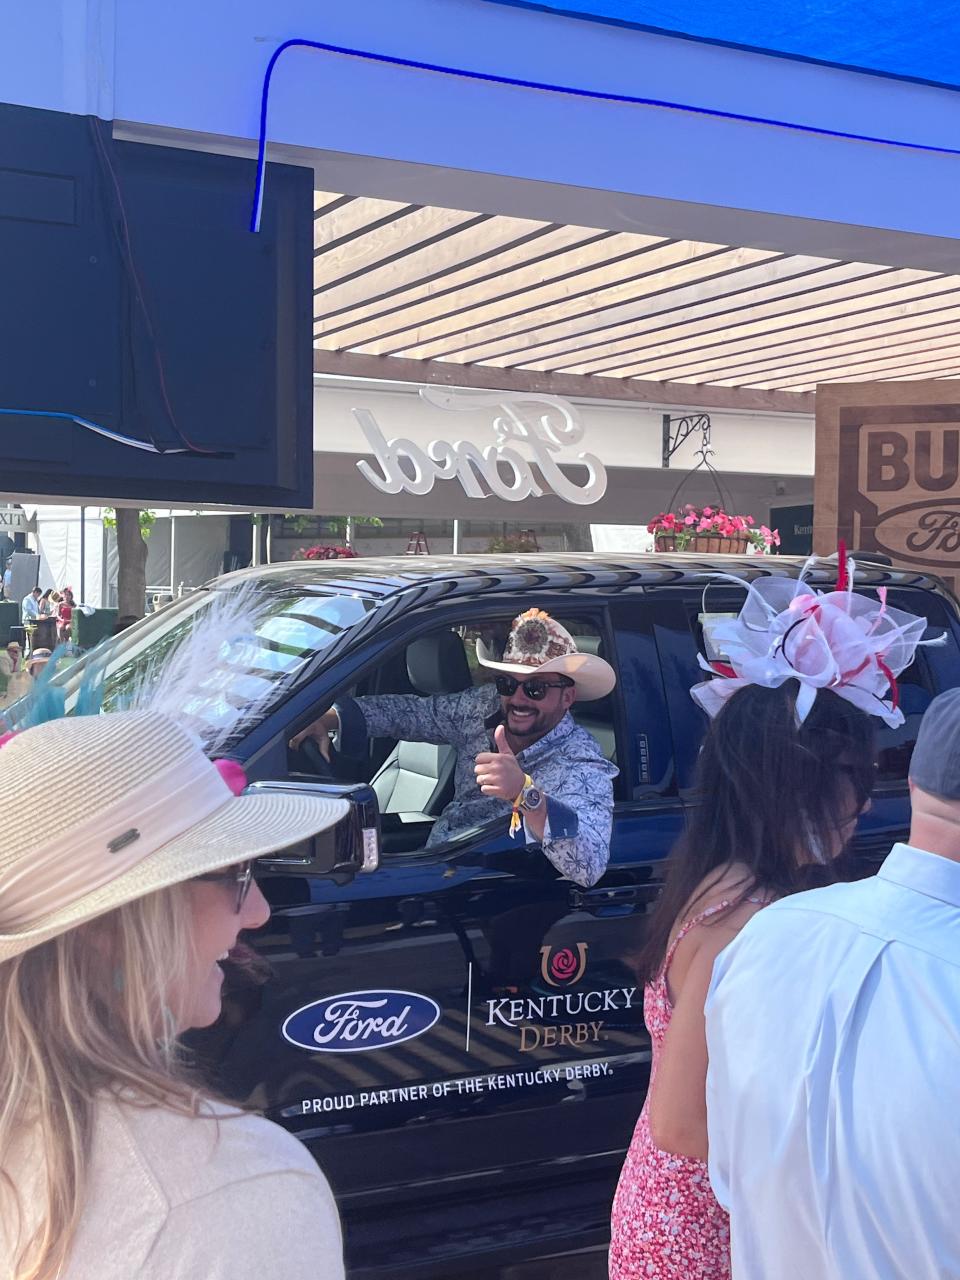 Stephen Chapman had some fun honking the horn of the new, all-electric F-150 at Ford’s 360 video booth at the Derby. However, the 2013 Ranger owner said he’s still skeptical about the capabilities of the future of Ford’s trucks.